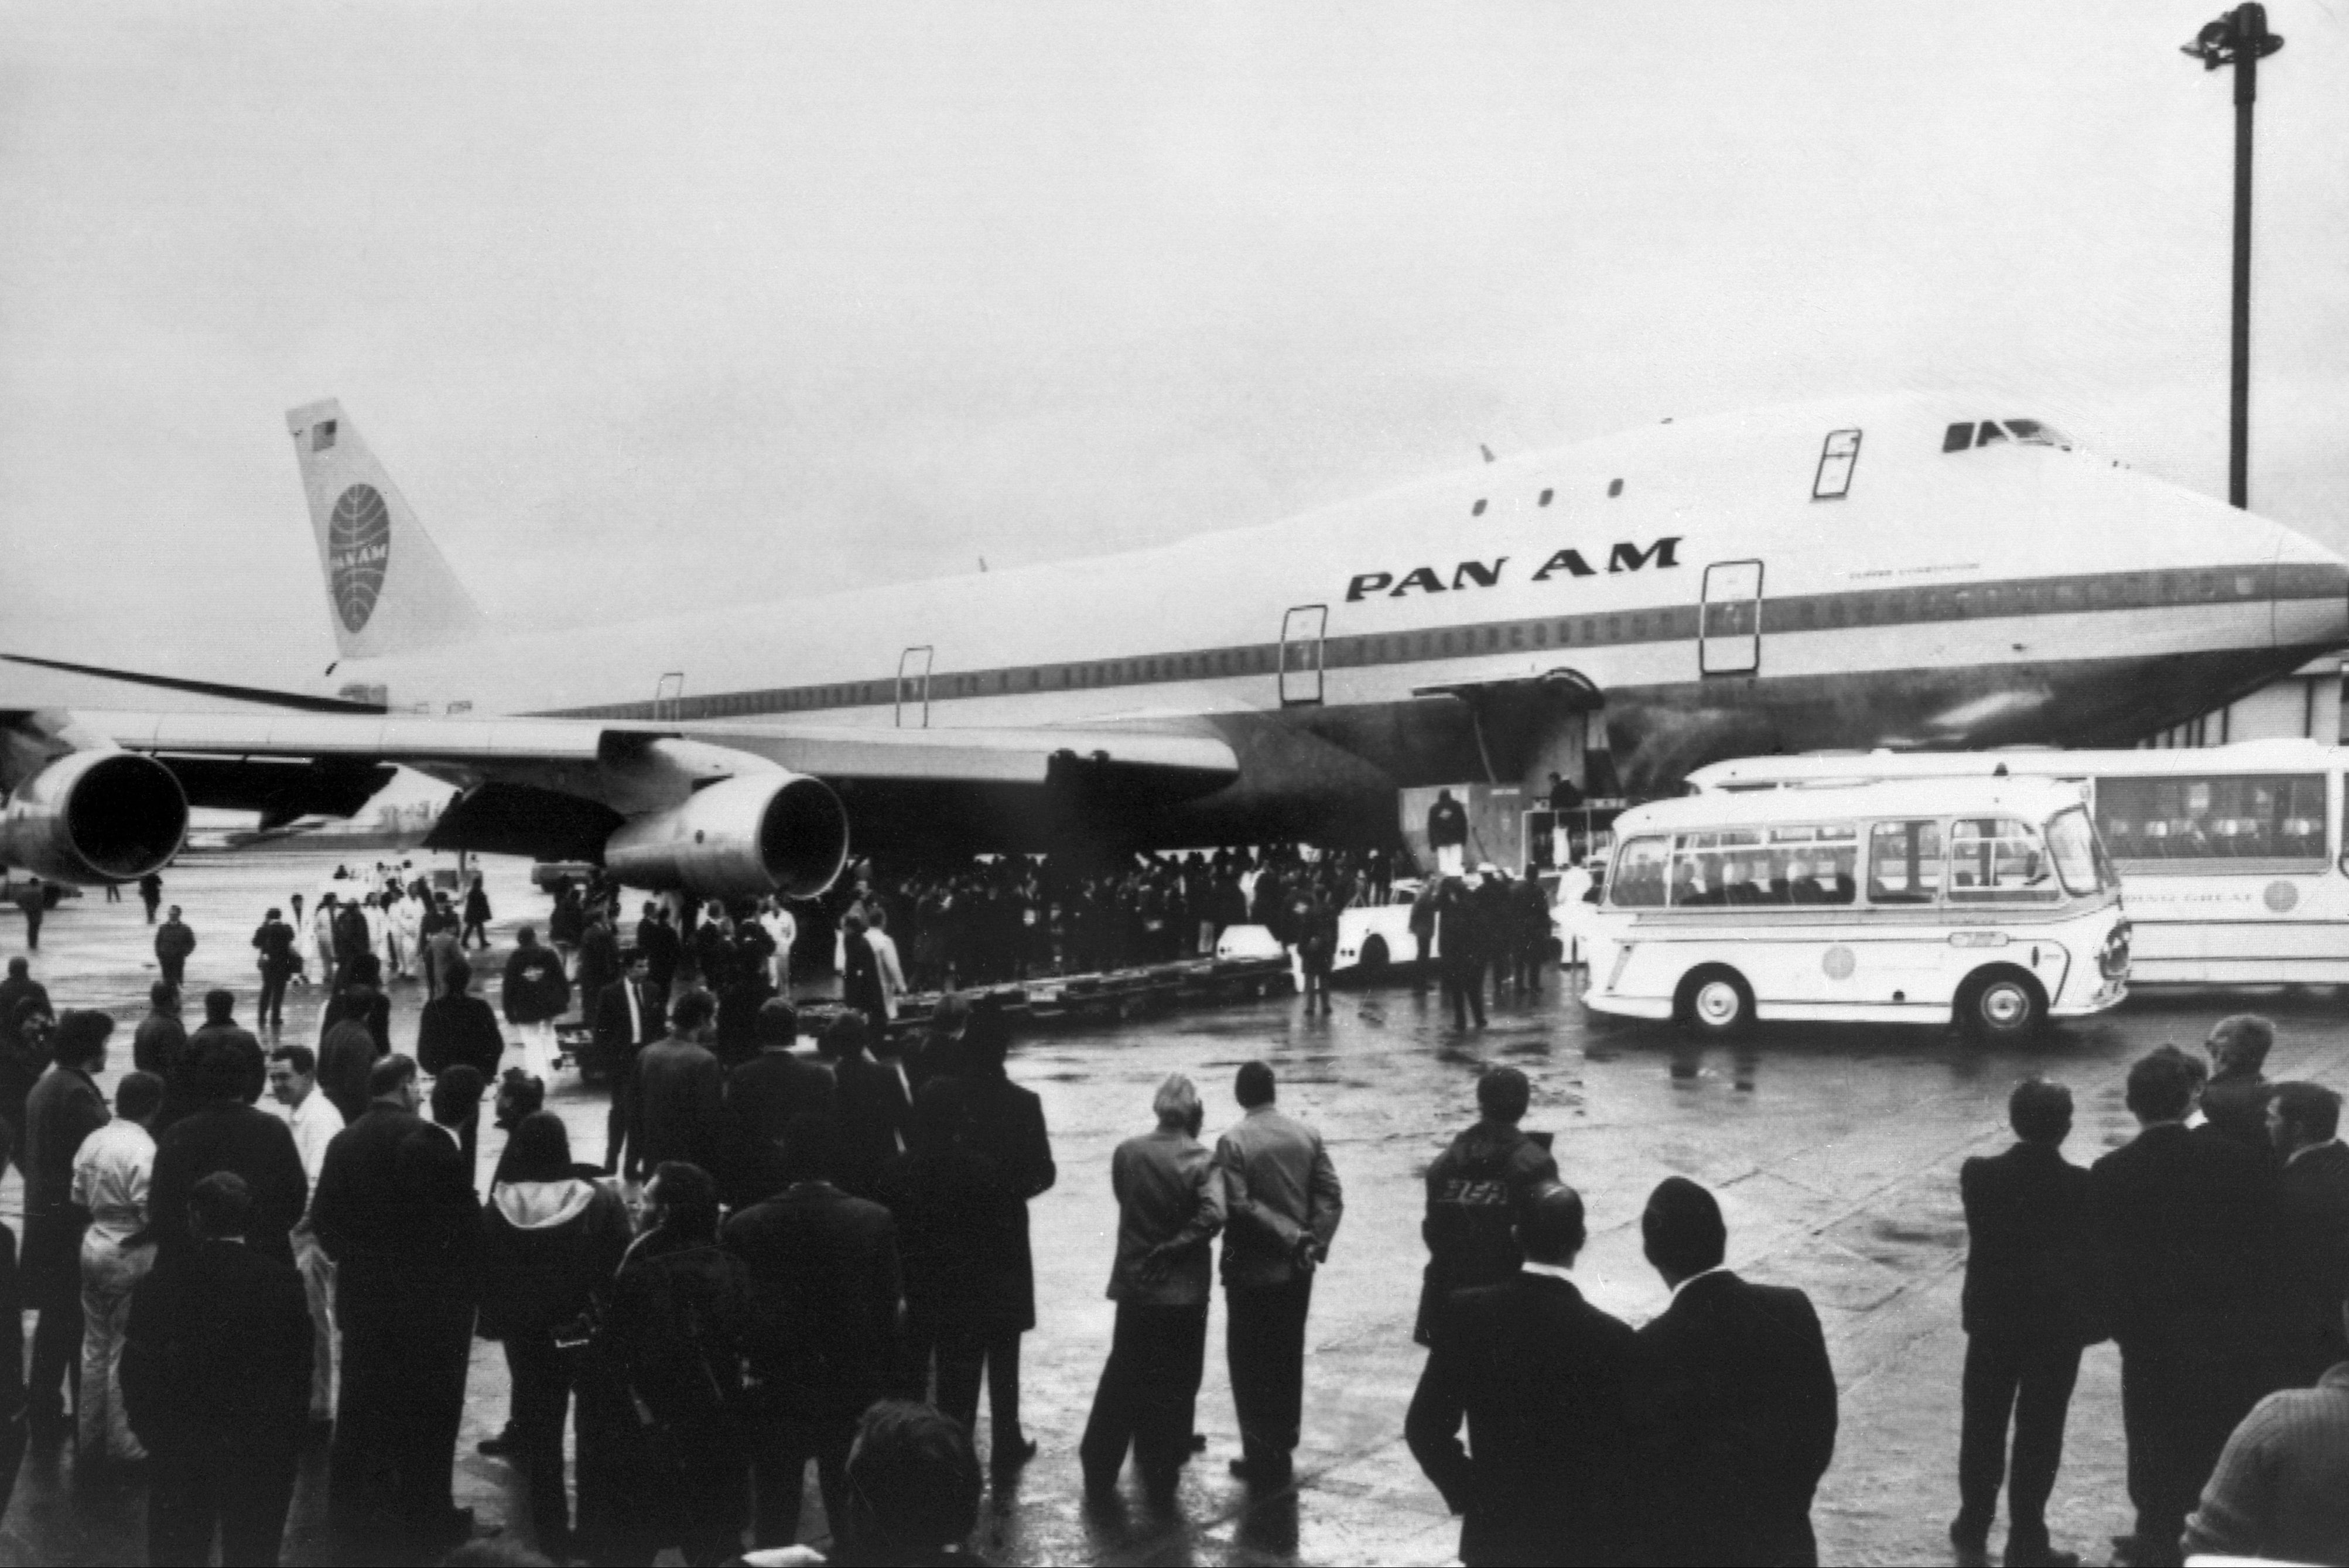 Making history: The first Boeing 747 Jumbo jet, operated by Pan Am, arrives from New York JFK at London Heathrow in January 1970